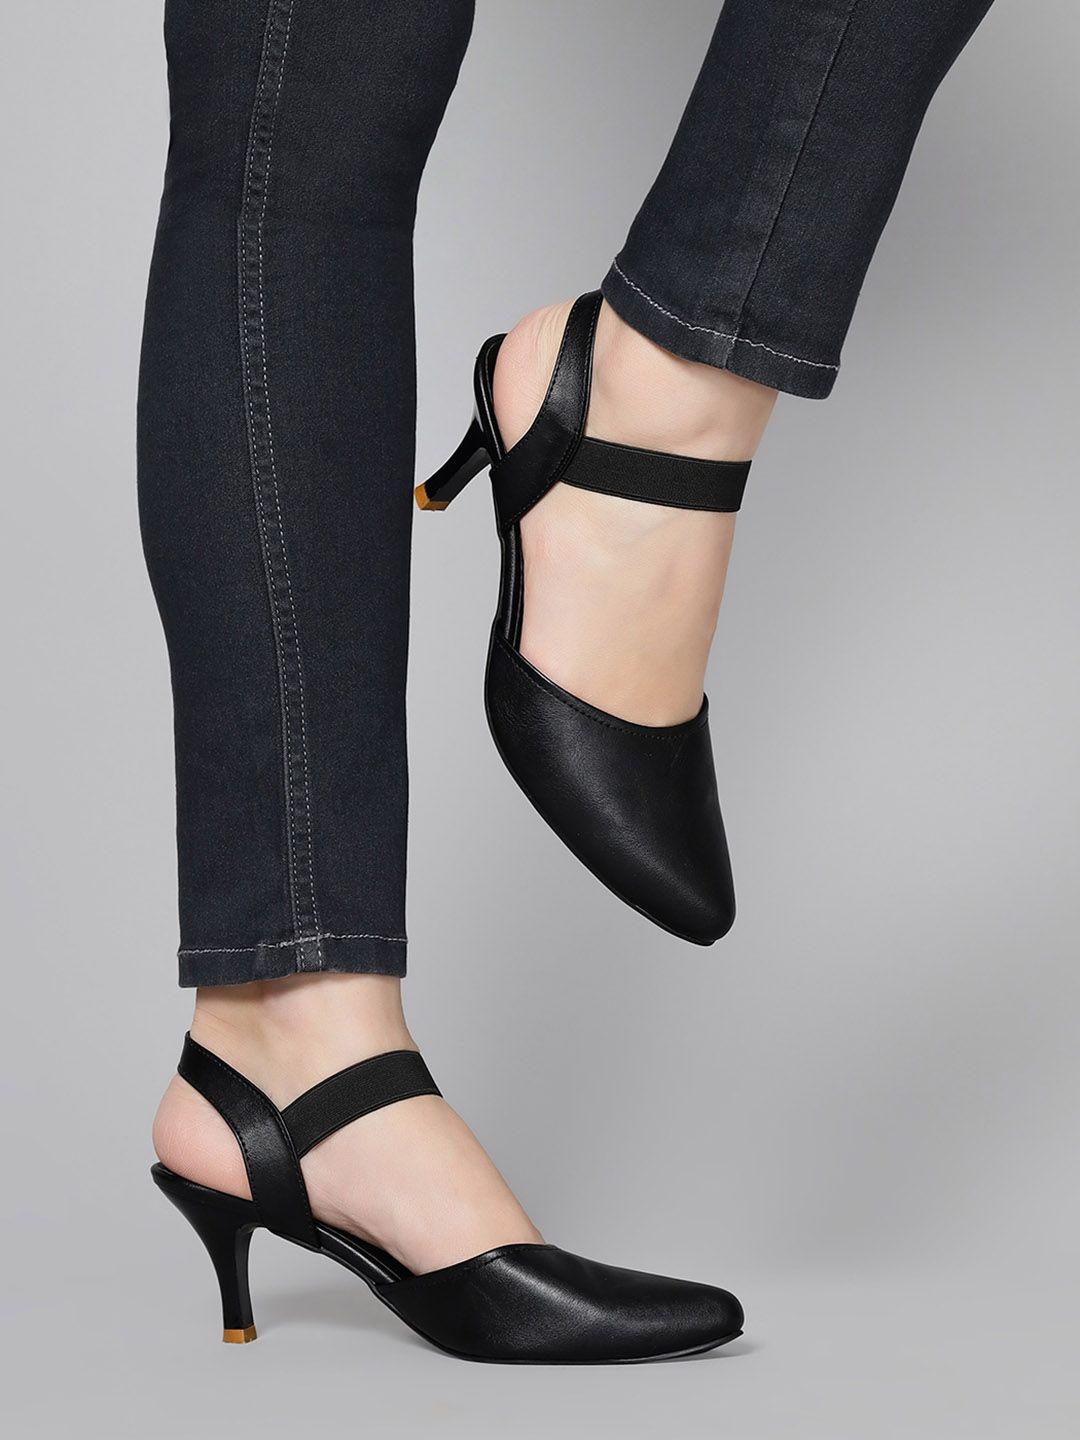 t.eleven-pointed-toe-slim-heeled-pumps